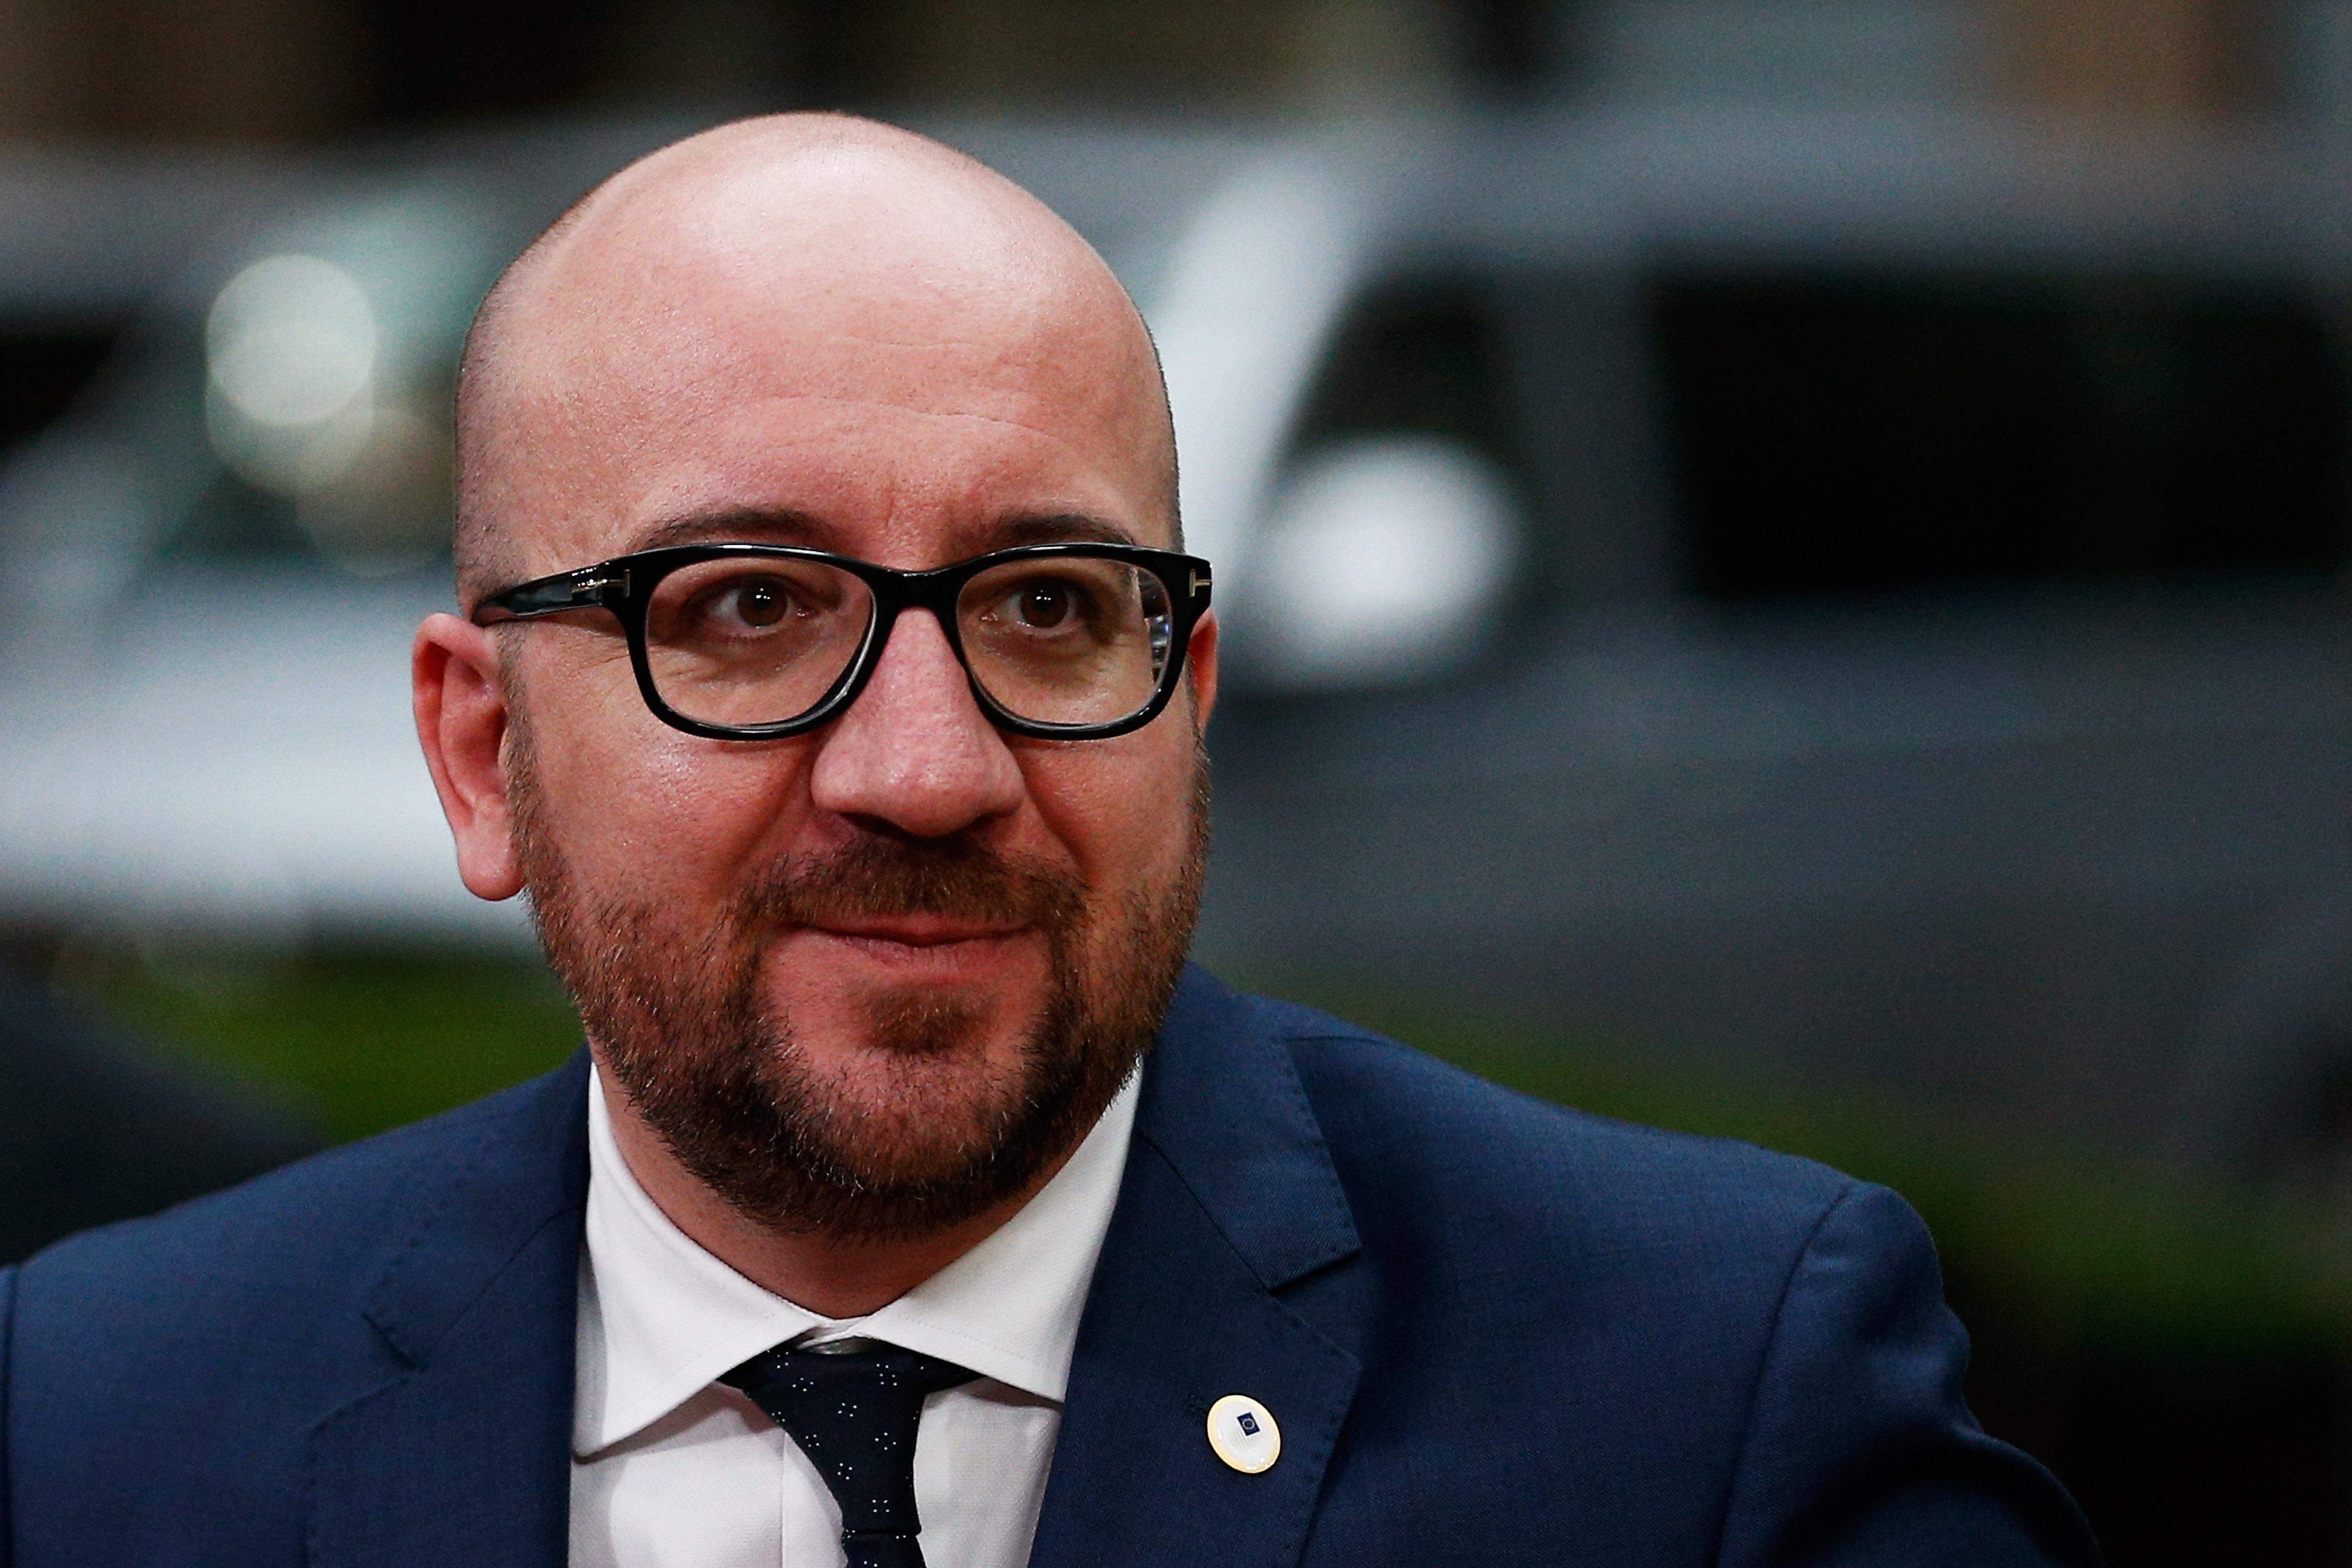 Prime Minister of Belgium, Charles Michel speaks to the media prior to The European Council Meeting on March 7, 2016 in Brussels (Dean Mouhtaropoulos—Getty Images)